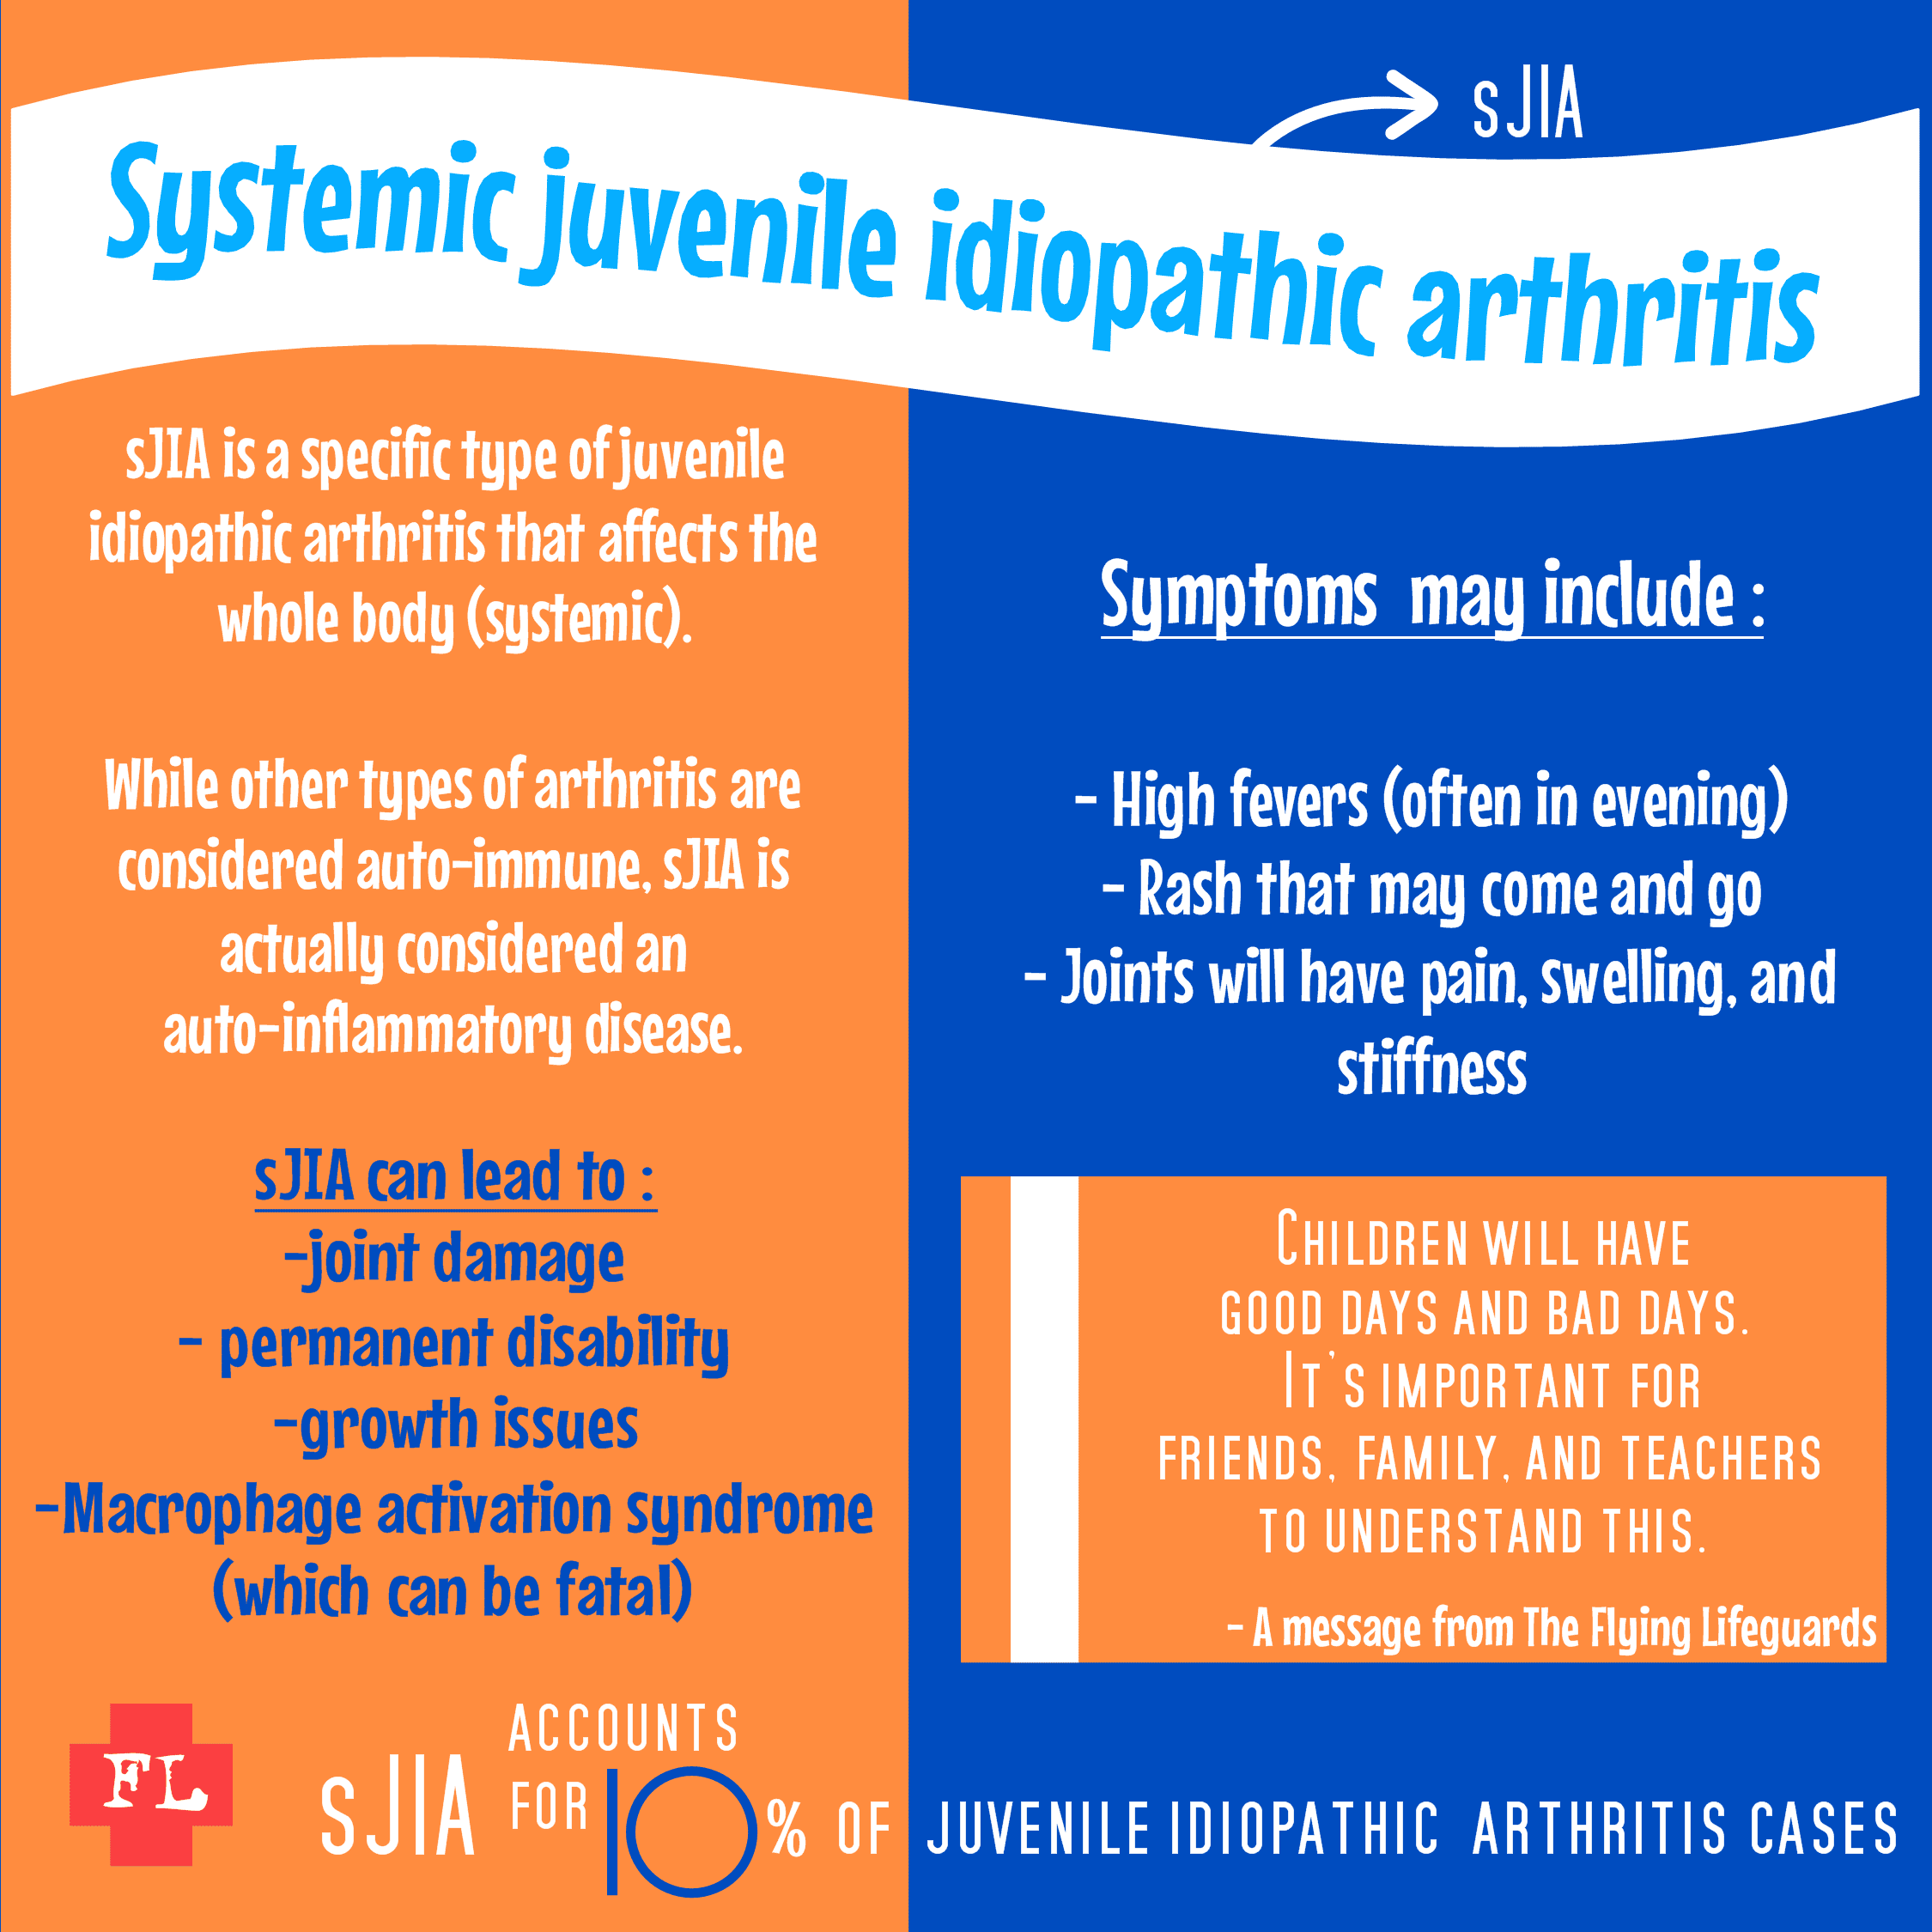 The Flying Lifeguards and sJIA systemic juvenile idiopathic arthritis ...